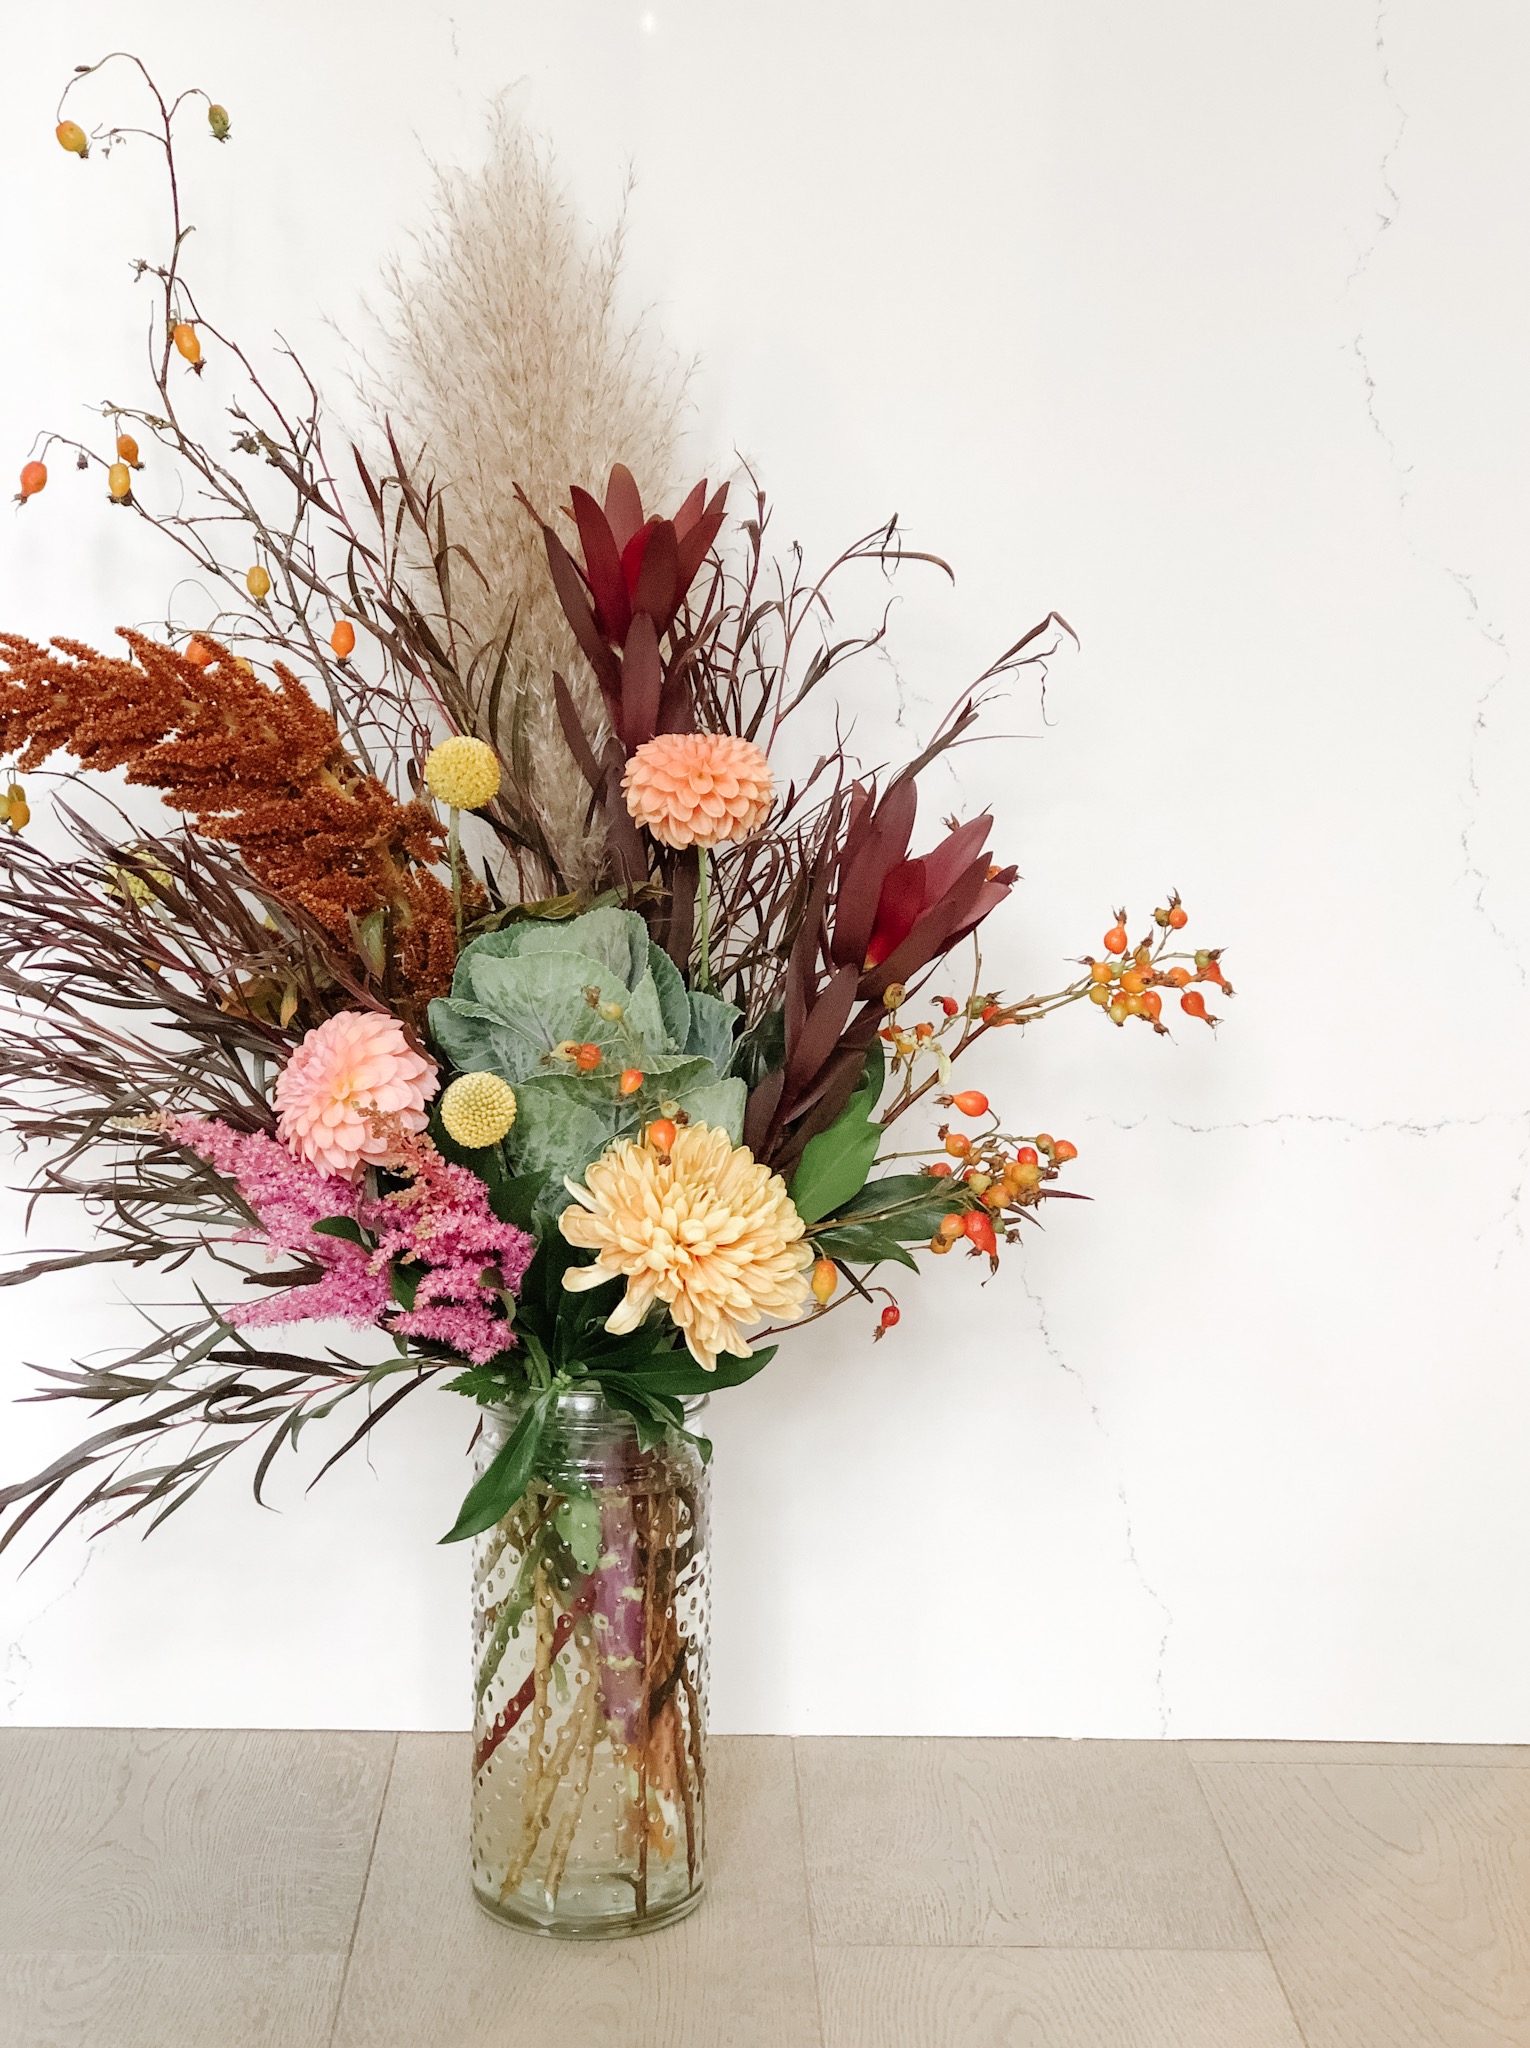 5 Ways Under $30 to Decorate Your Home for Fall - on the Bronte Bride Blog